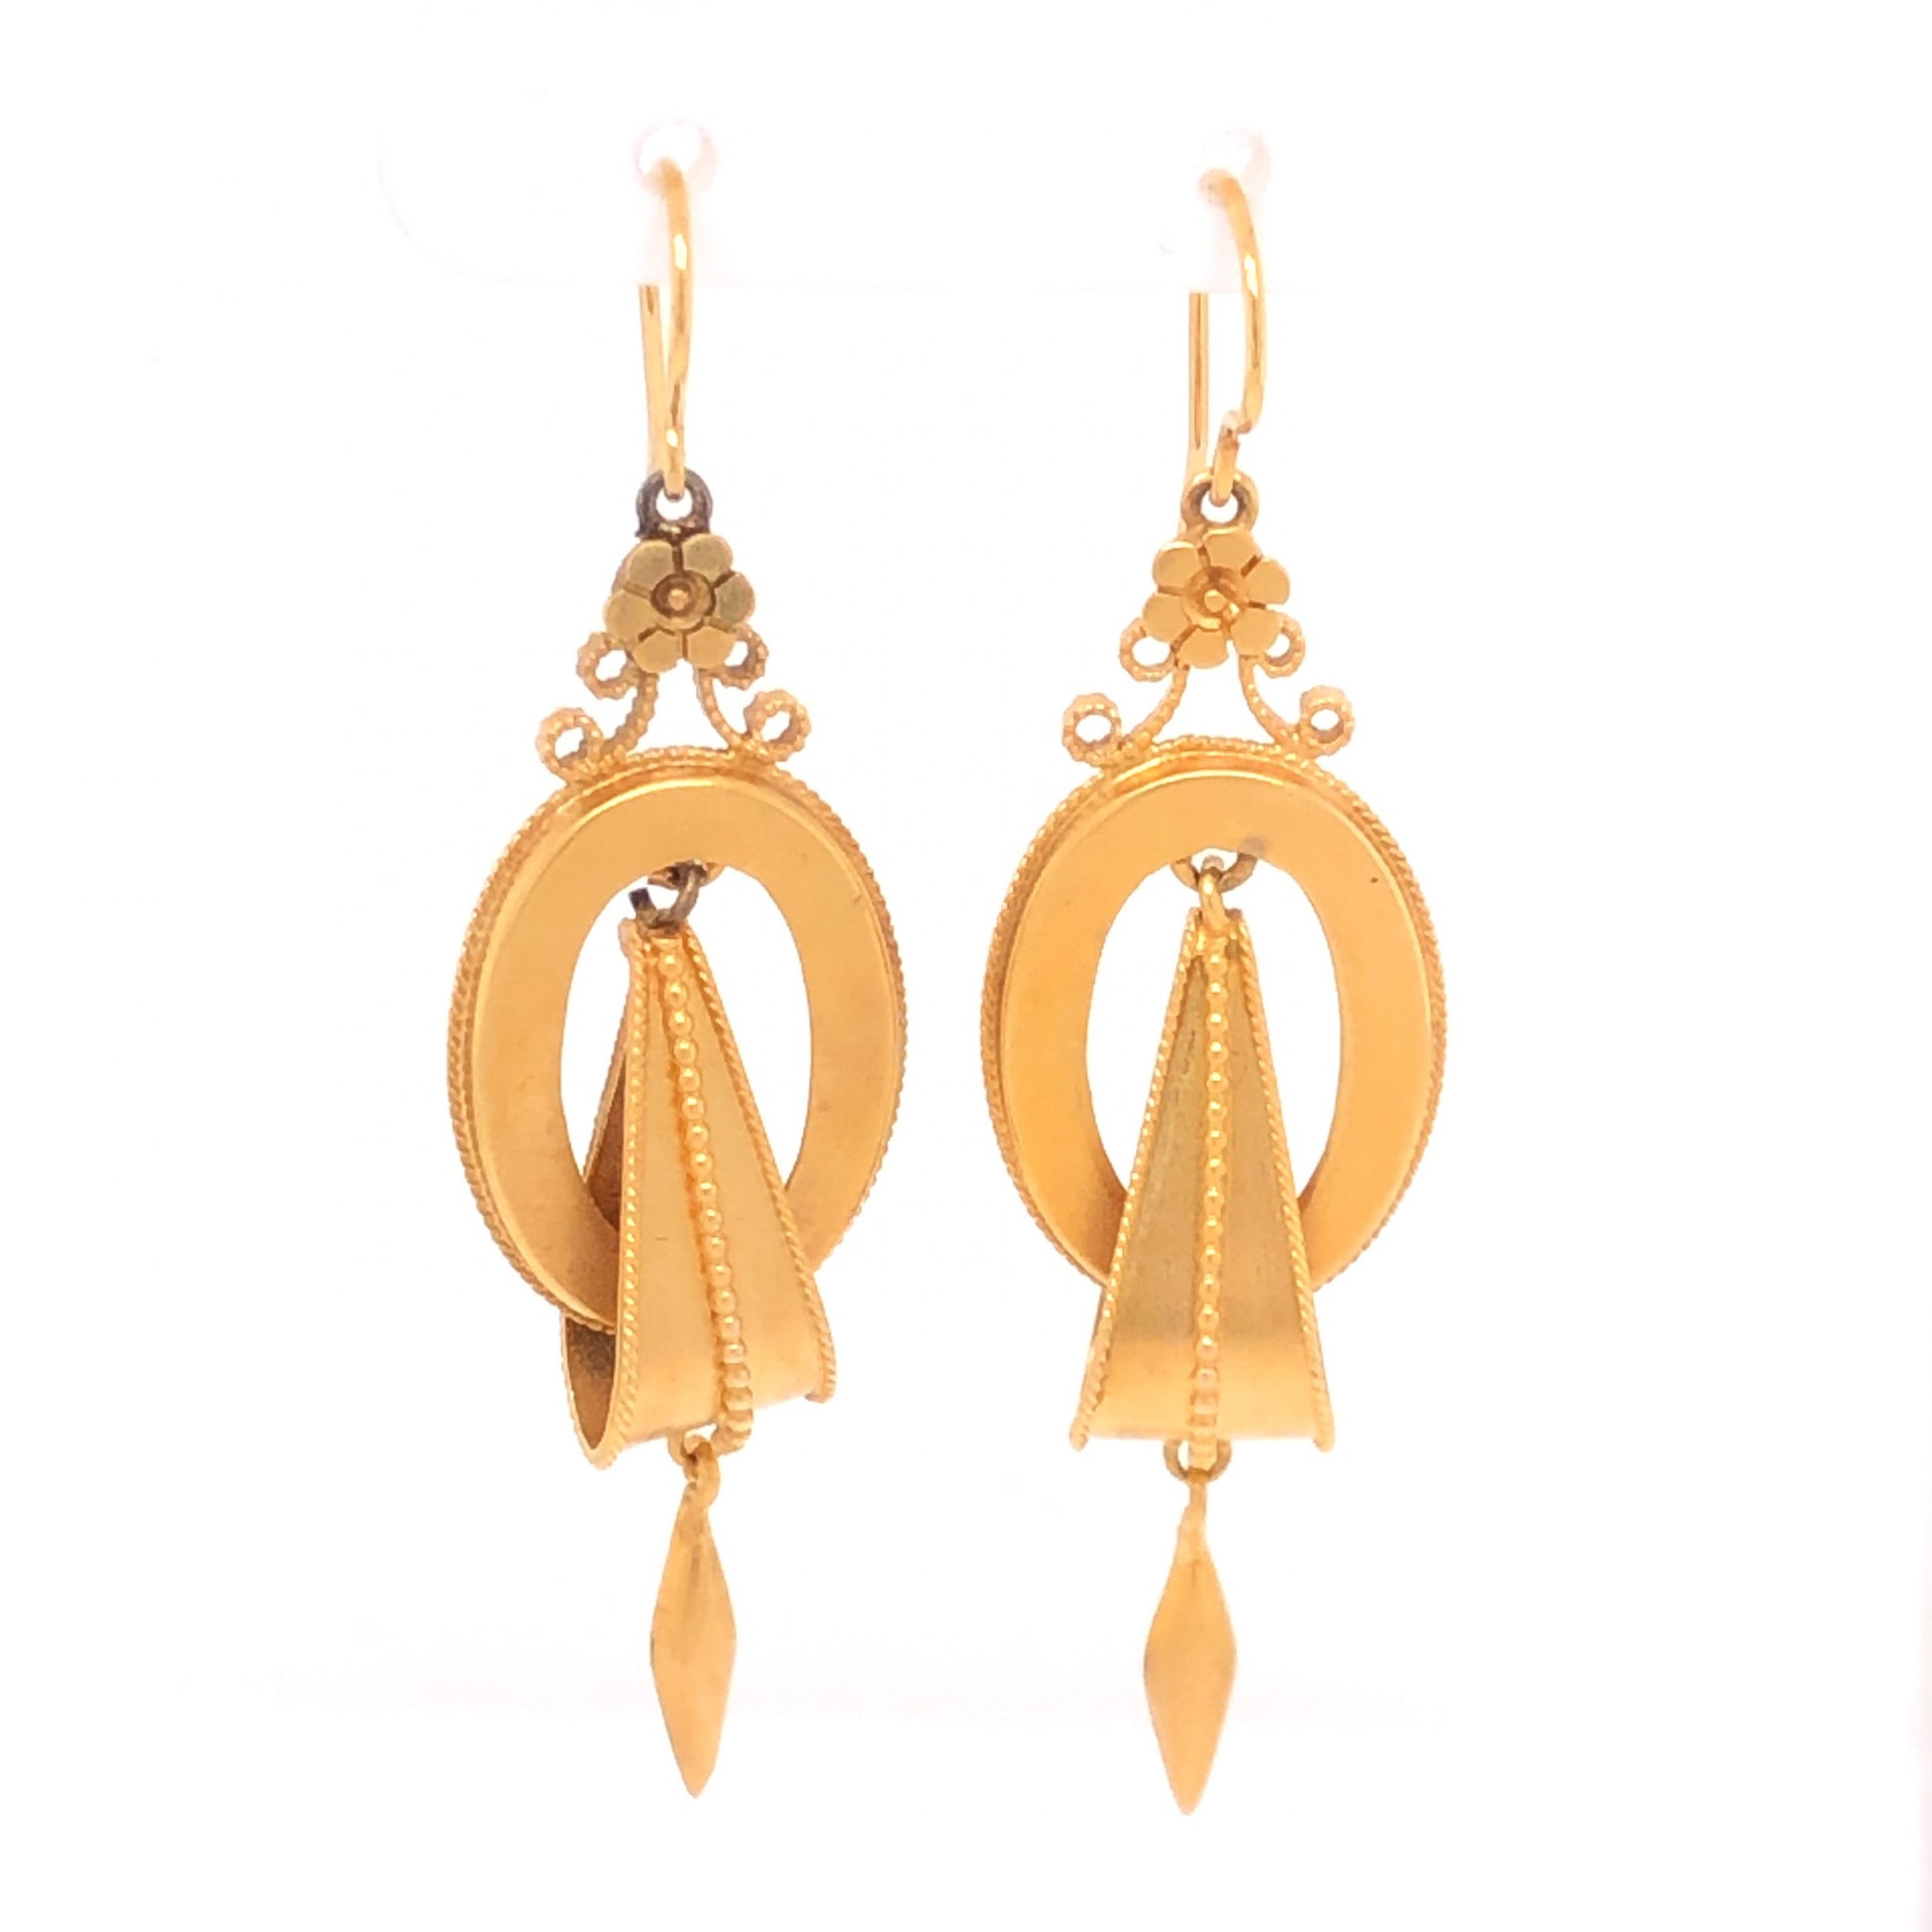 Antique Victorian Earrings in 14k Yellow GoldComposition: PlatinumTotal Gram Weight: 4.9 g